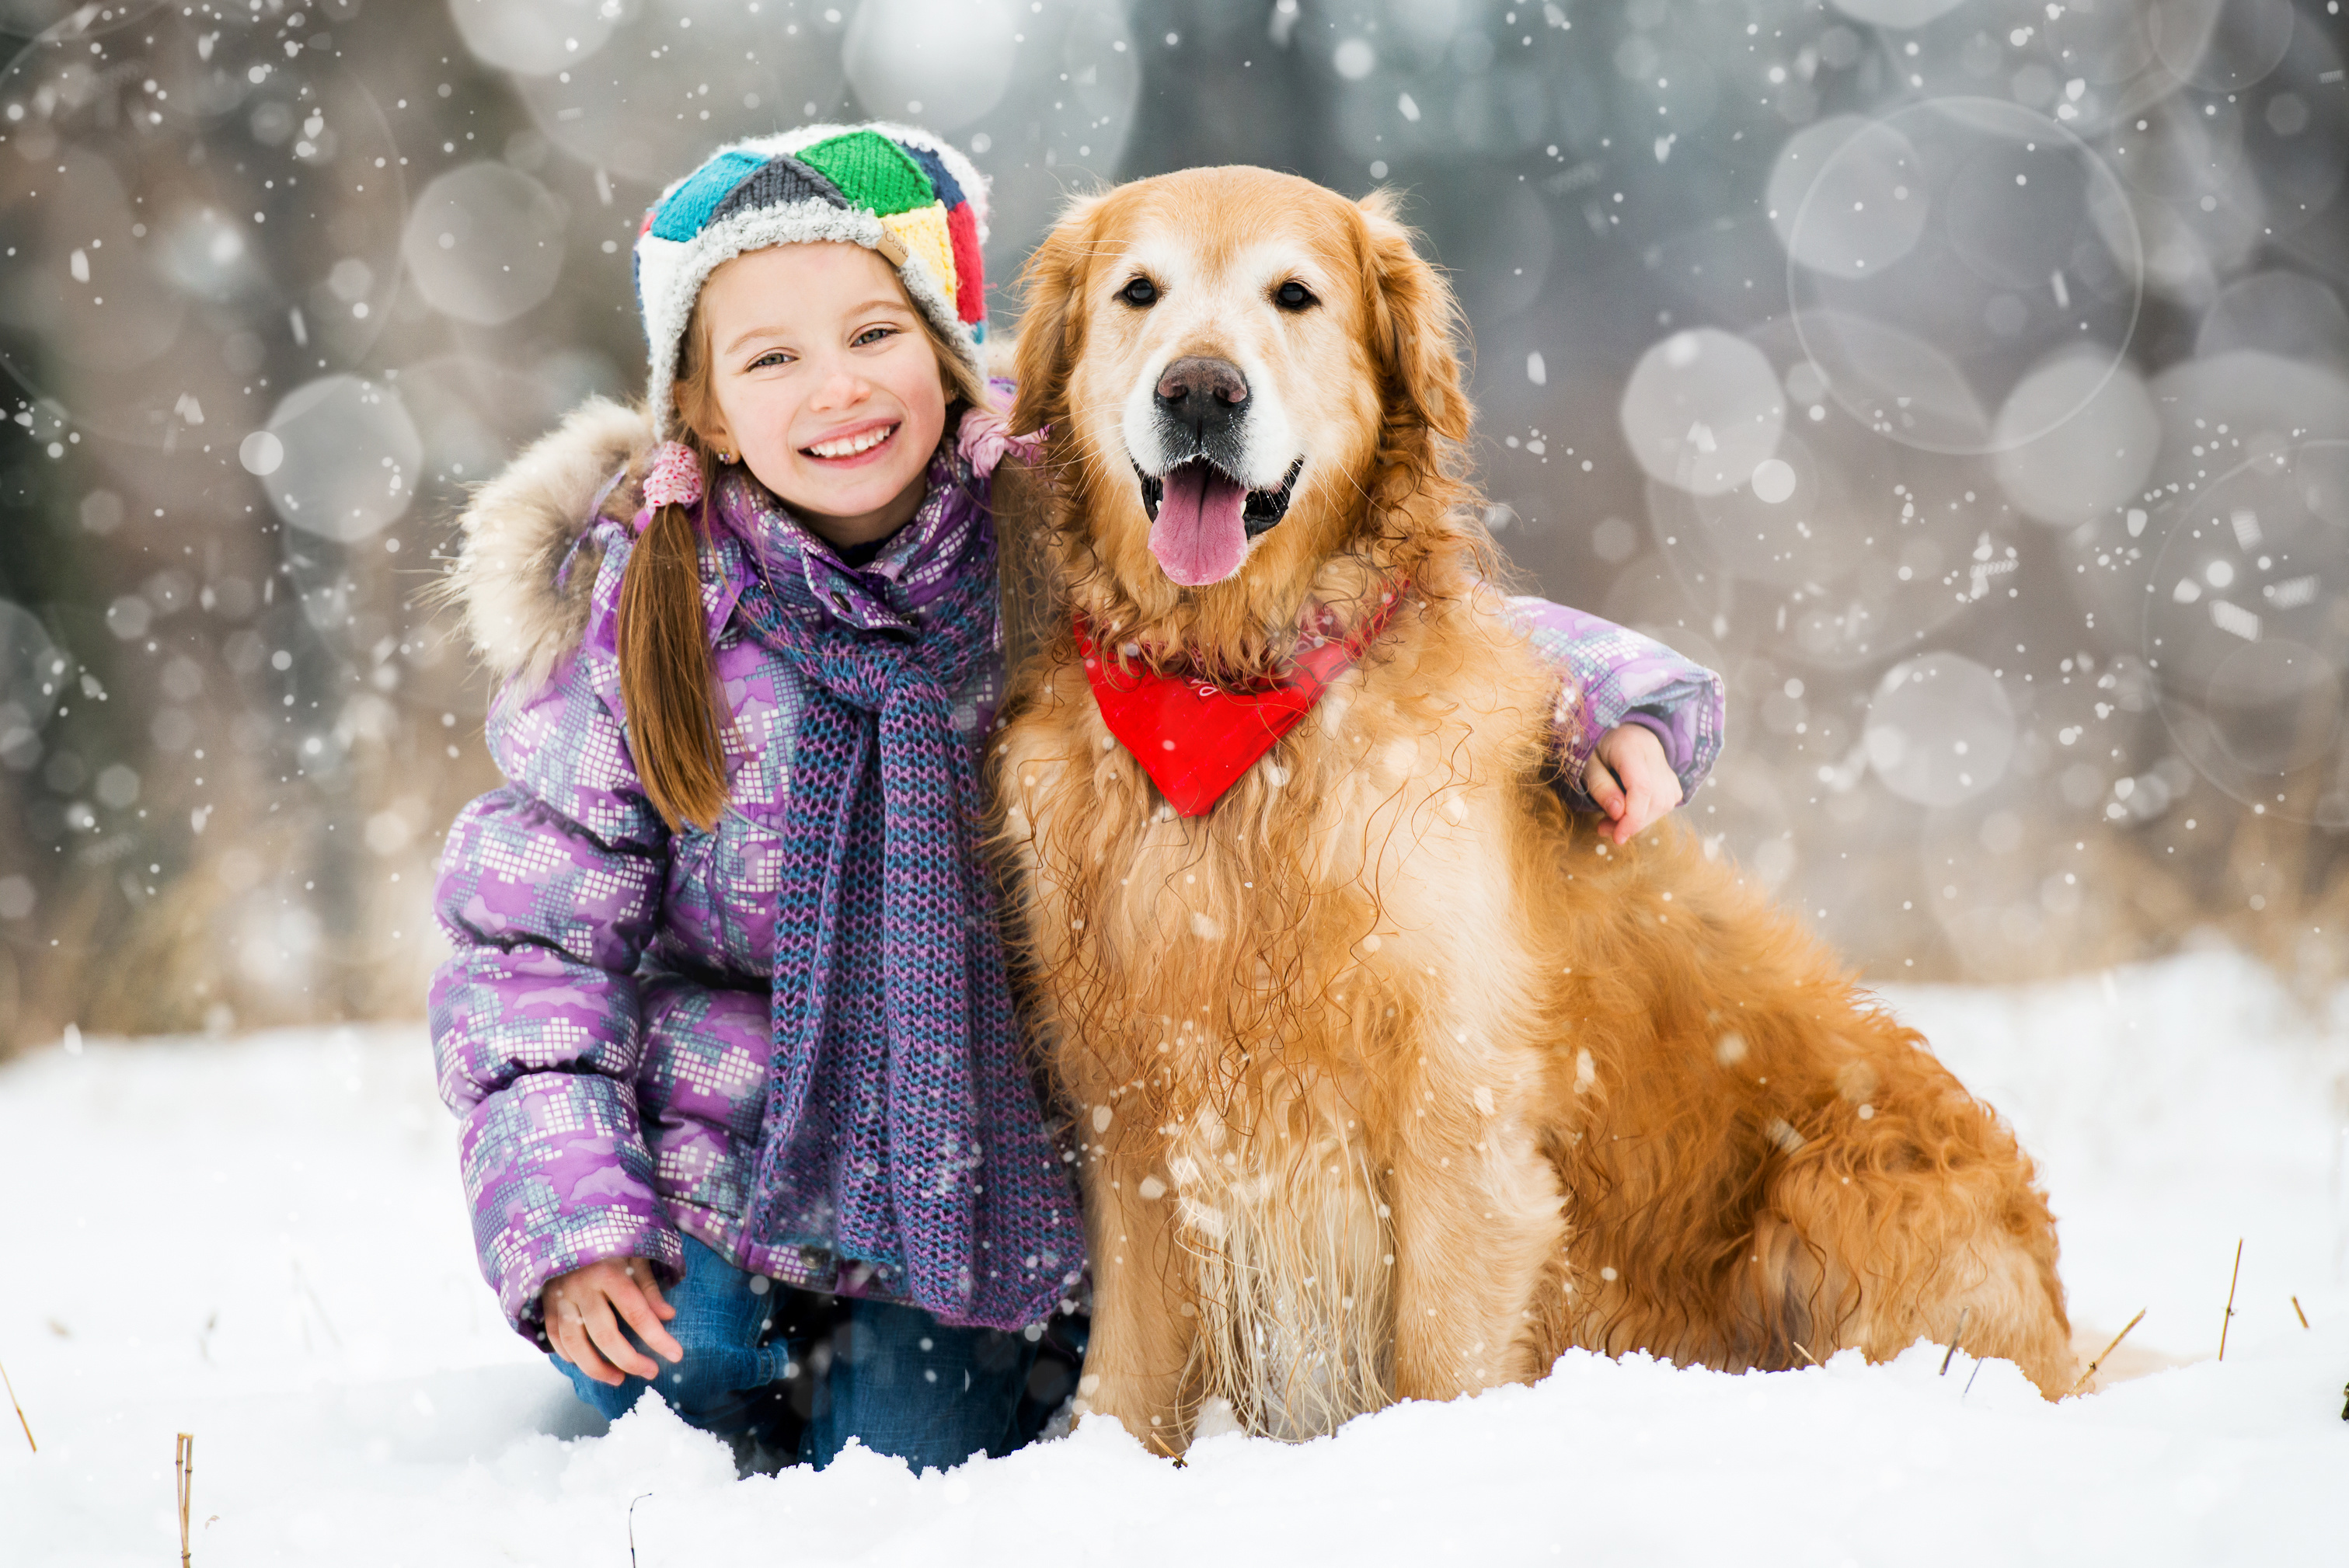 little-girl-in-snow-with-dog